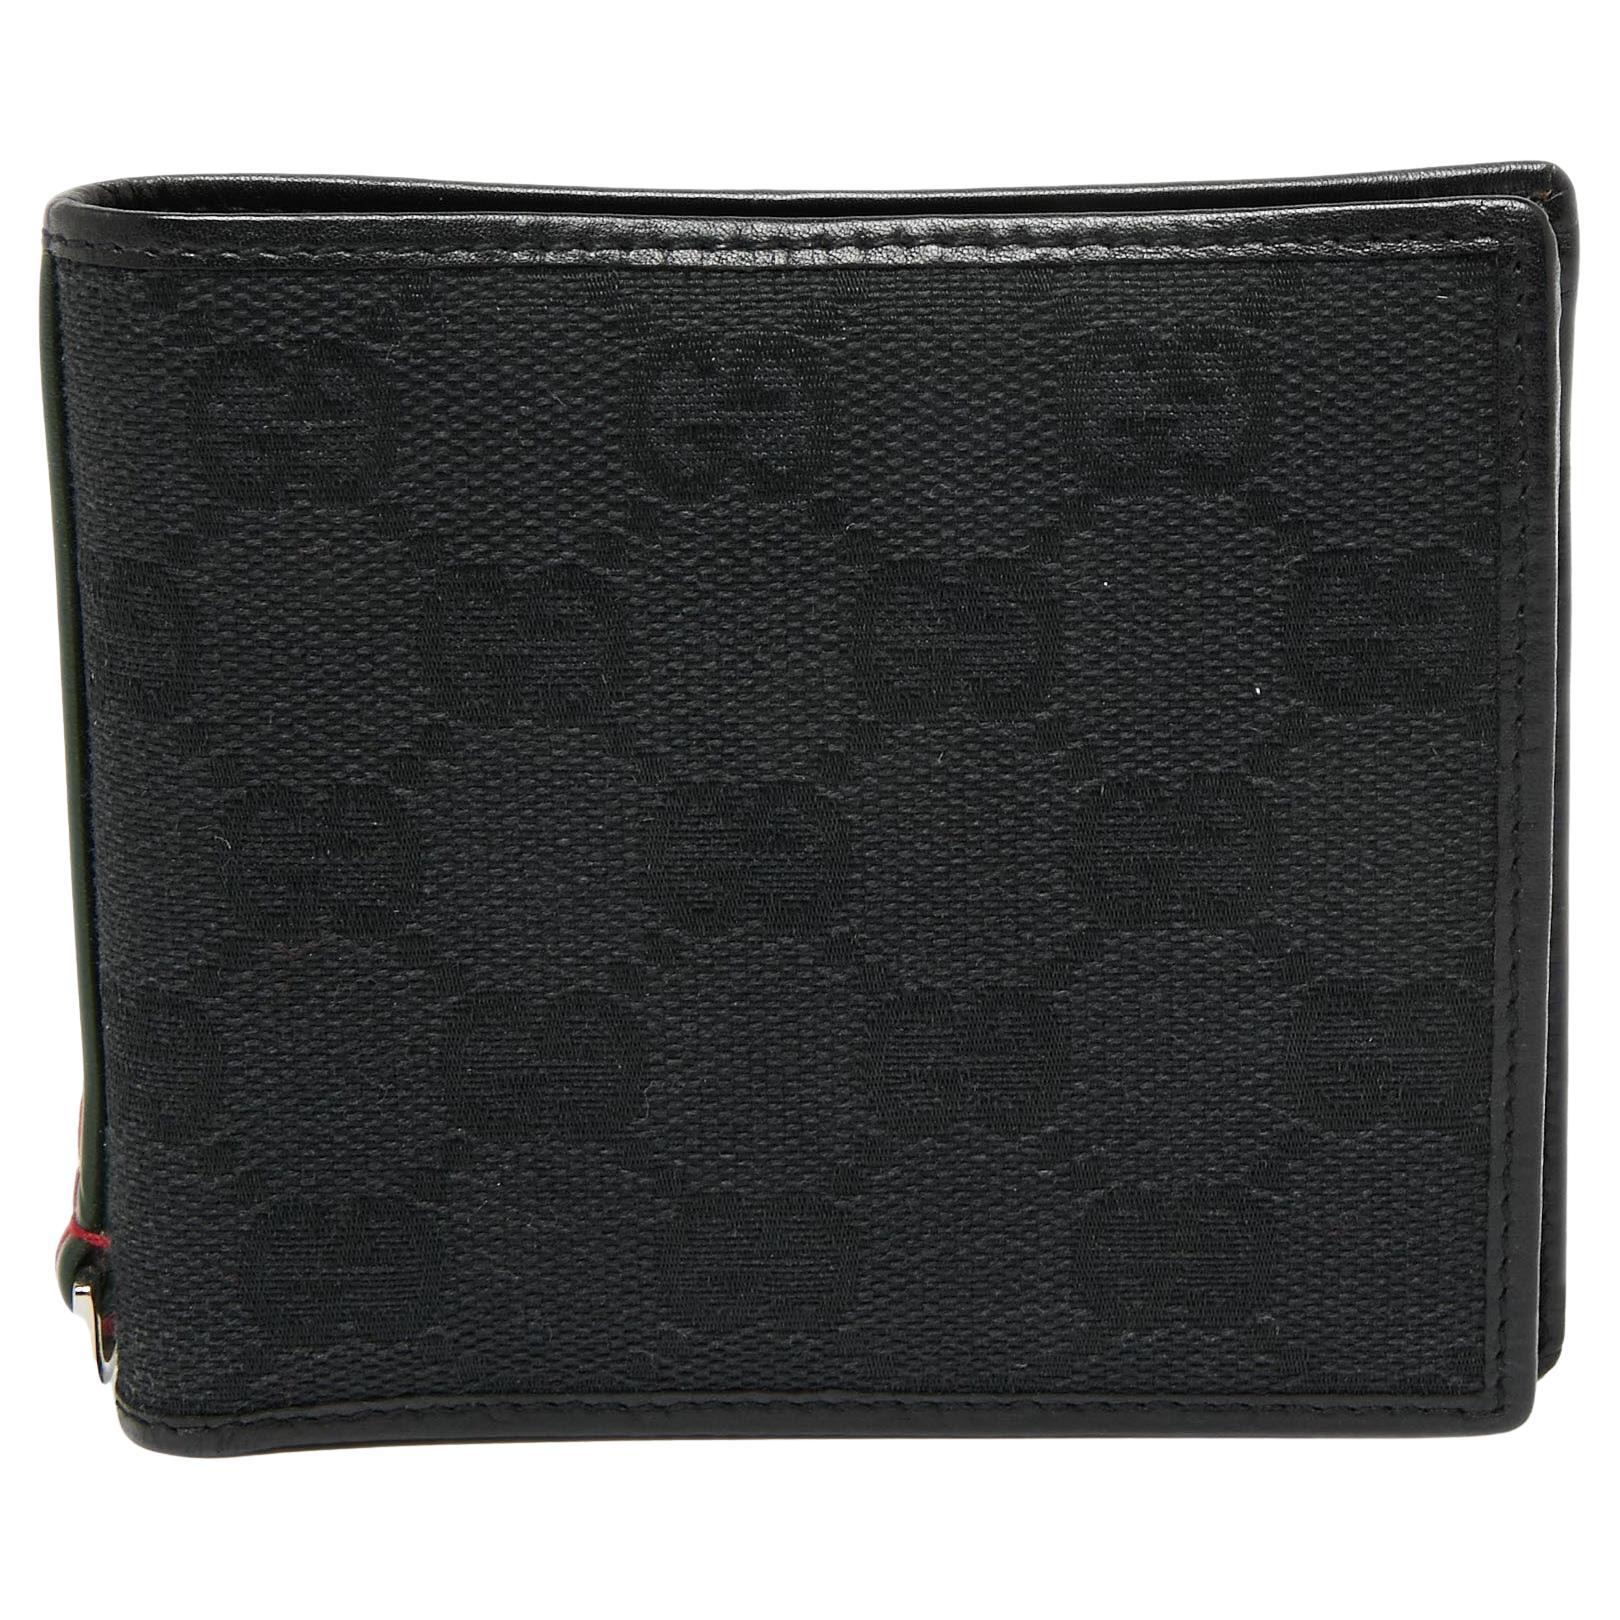 Gucci Black GG Canvas and Leather Wed Bifold Wallet